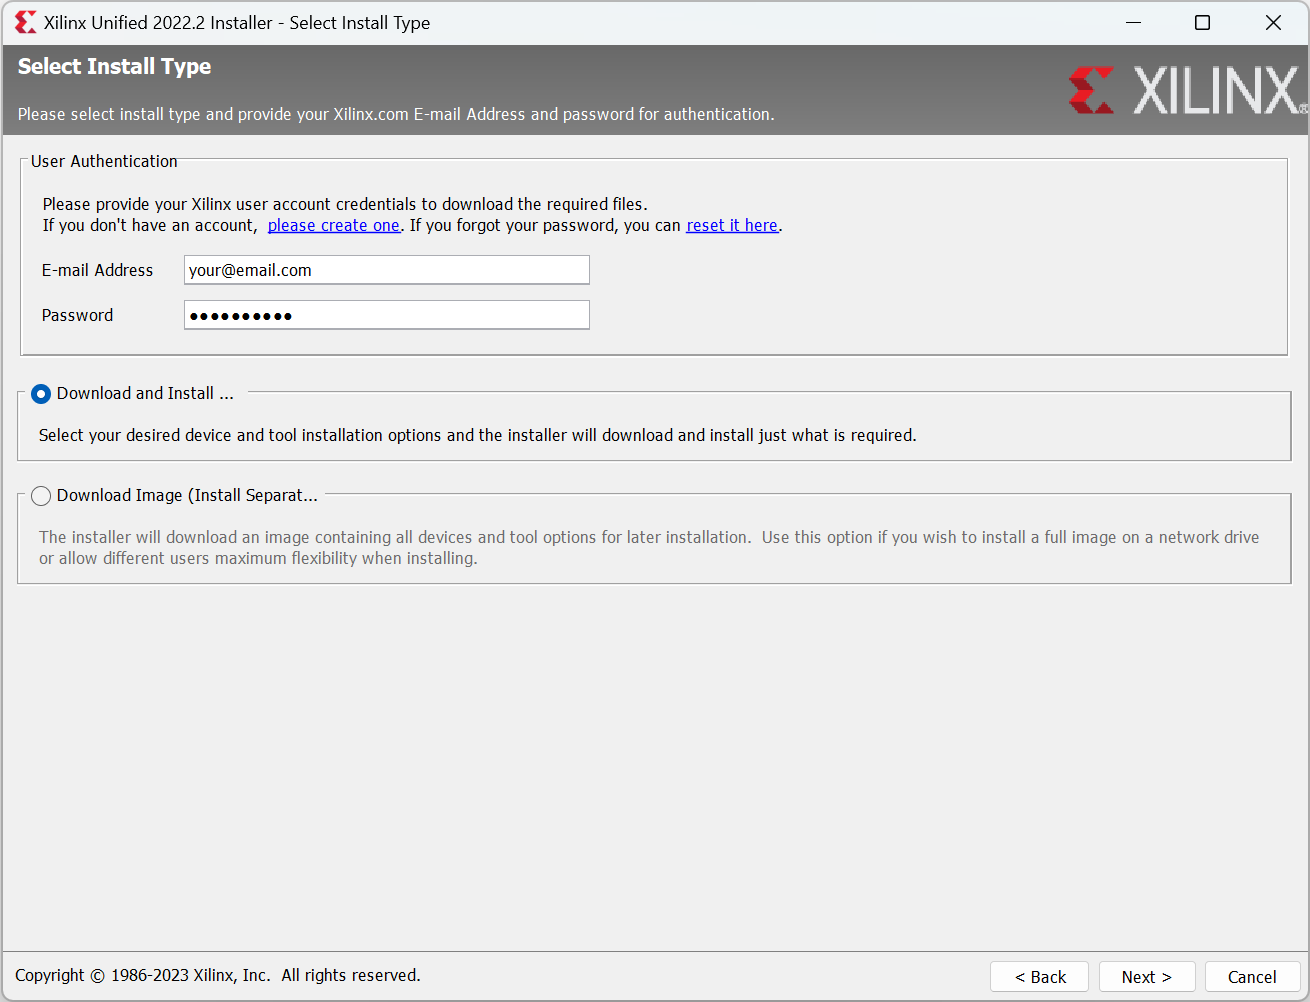 Xilinx Unified Installer "Select Install Type" Page Screenshot